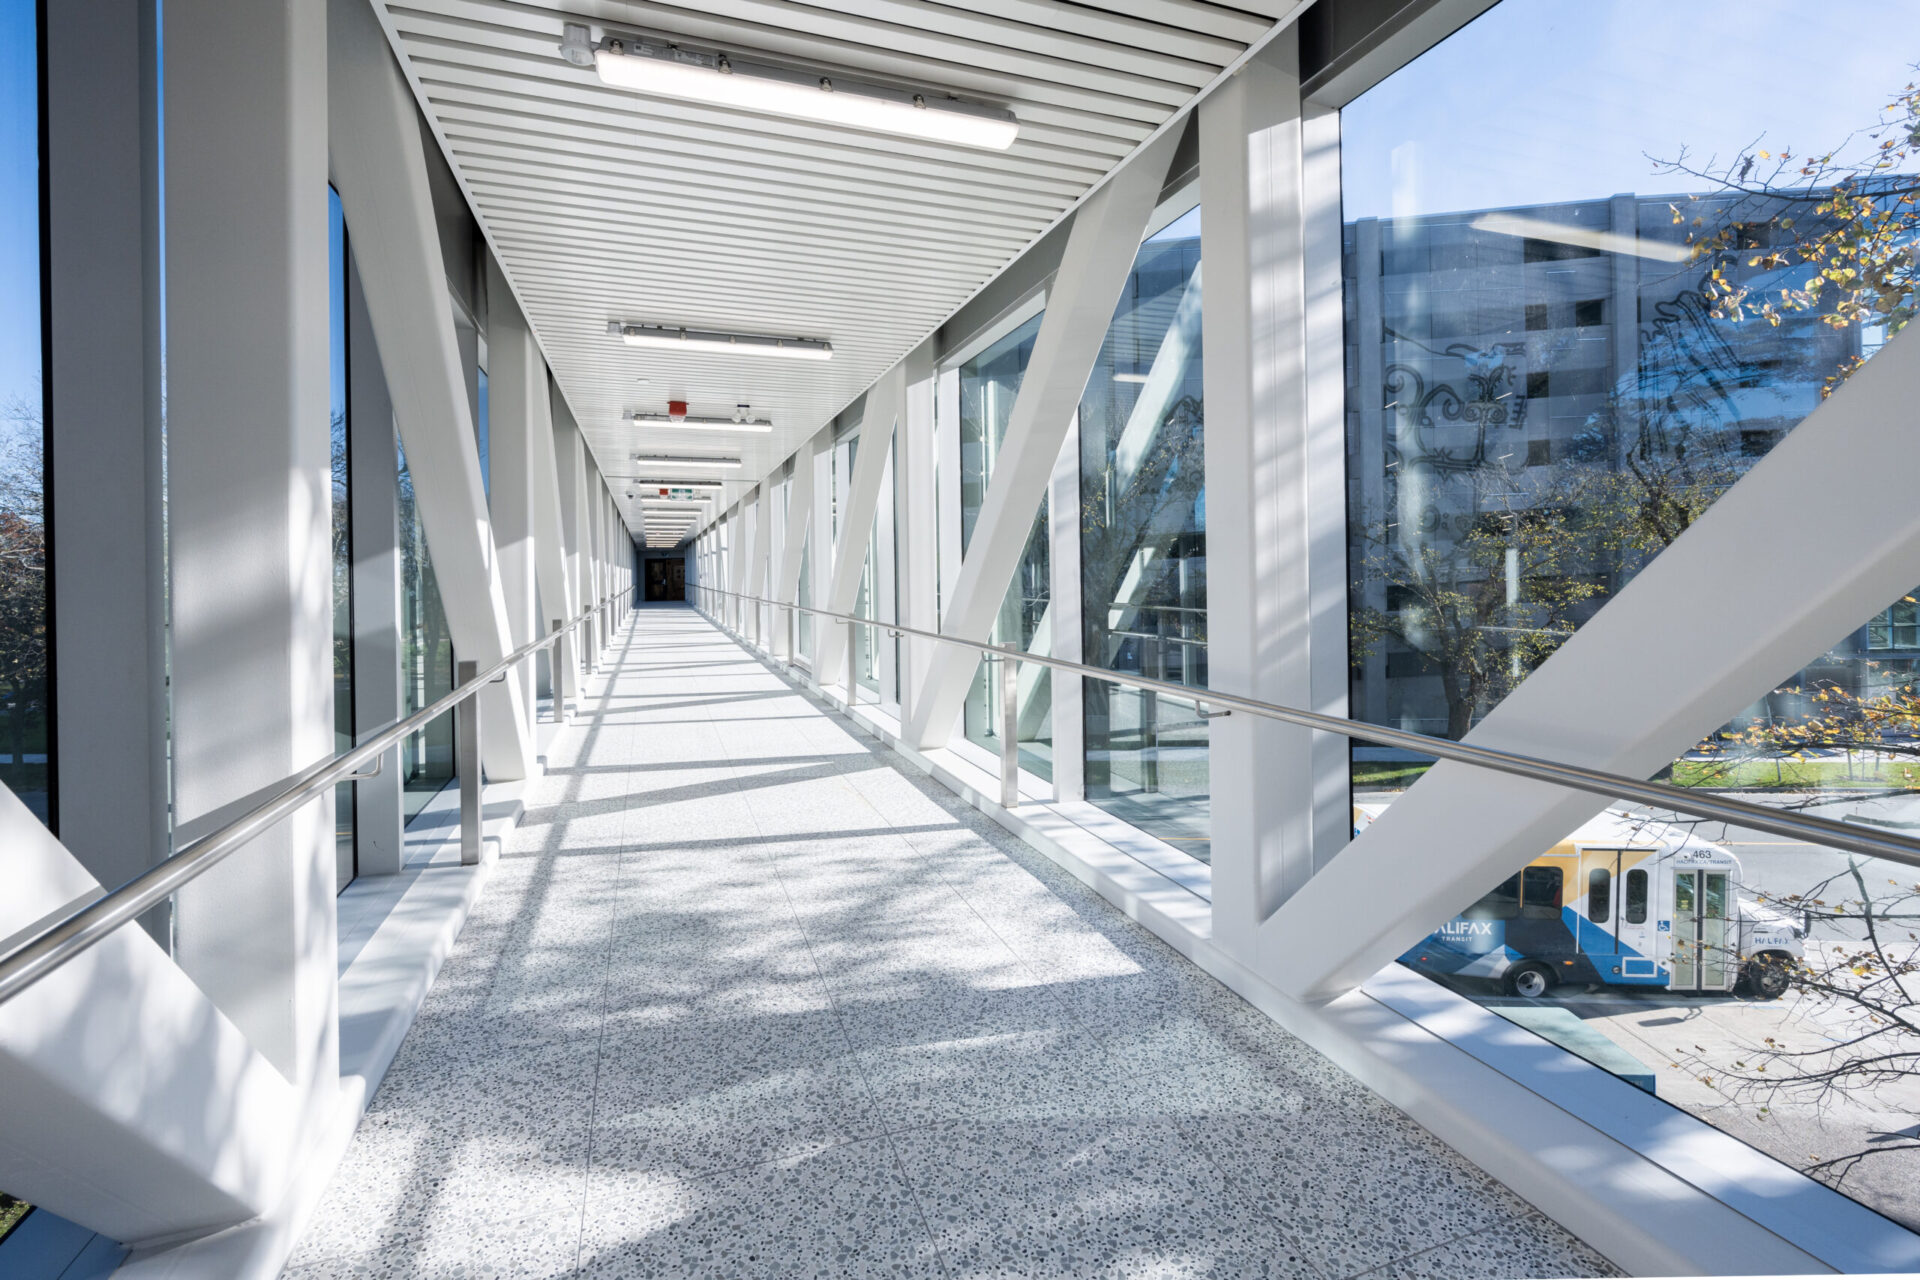 An architectural walkway featuring glass railings.